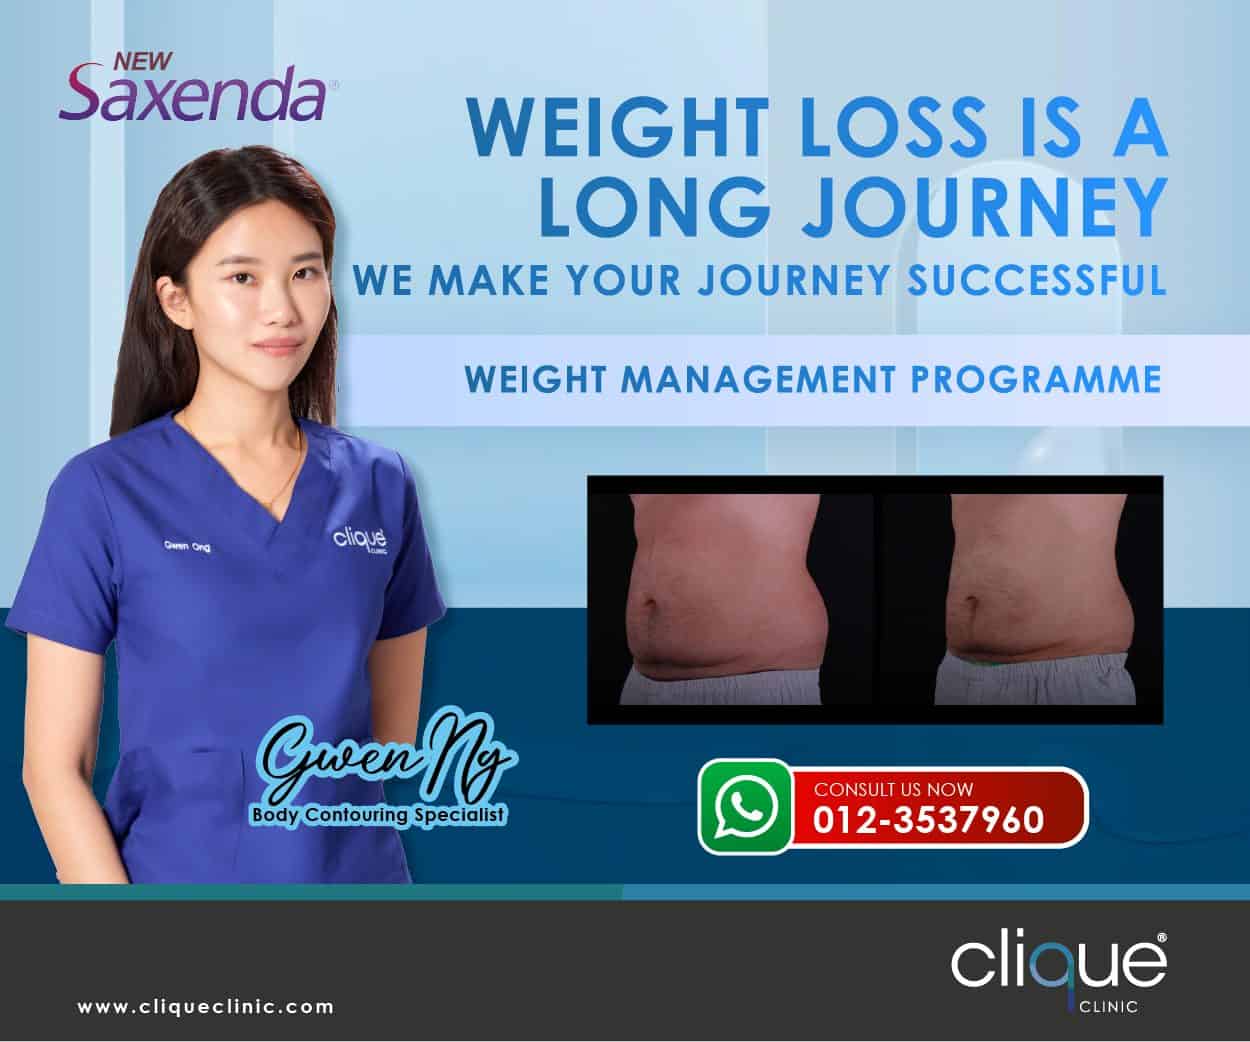 You are currently viewing Looking for effective weight loss? You can consider Saxenda